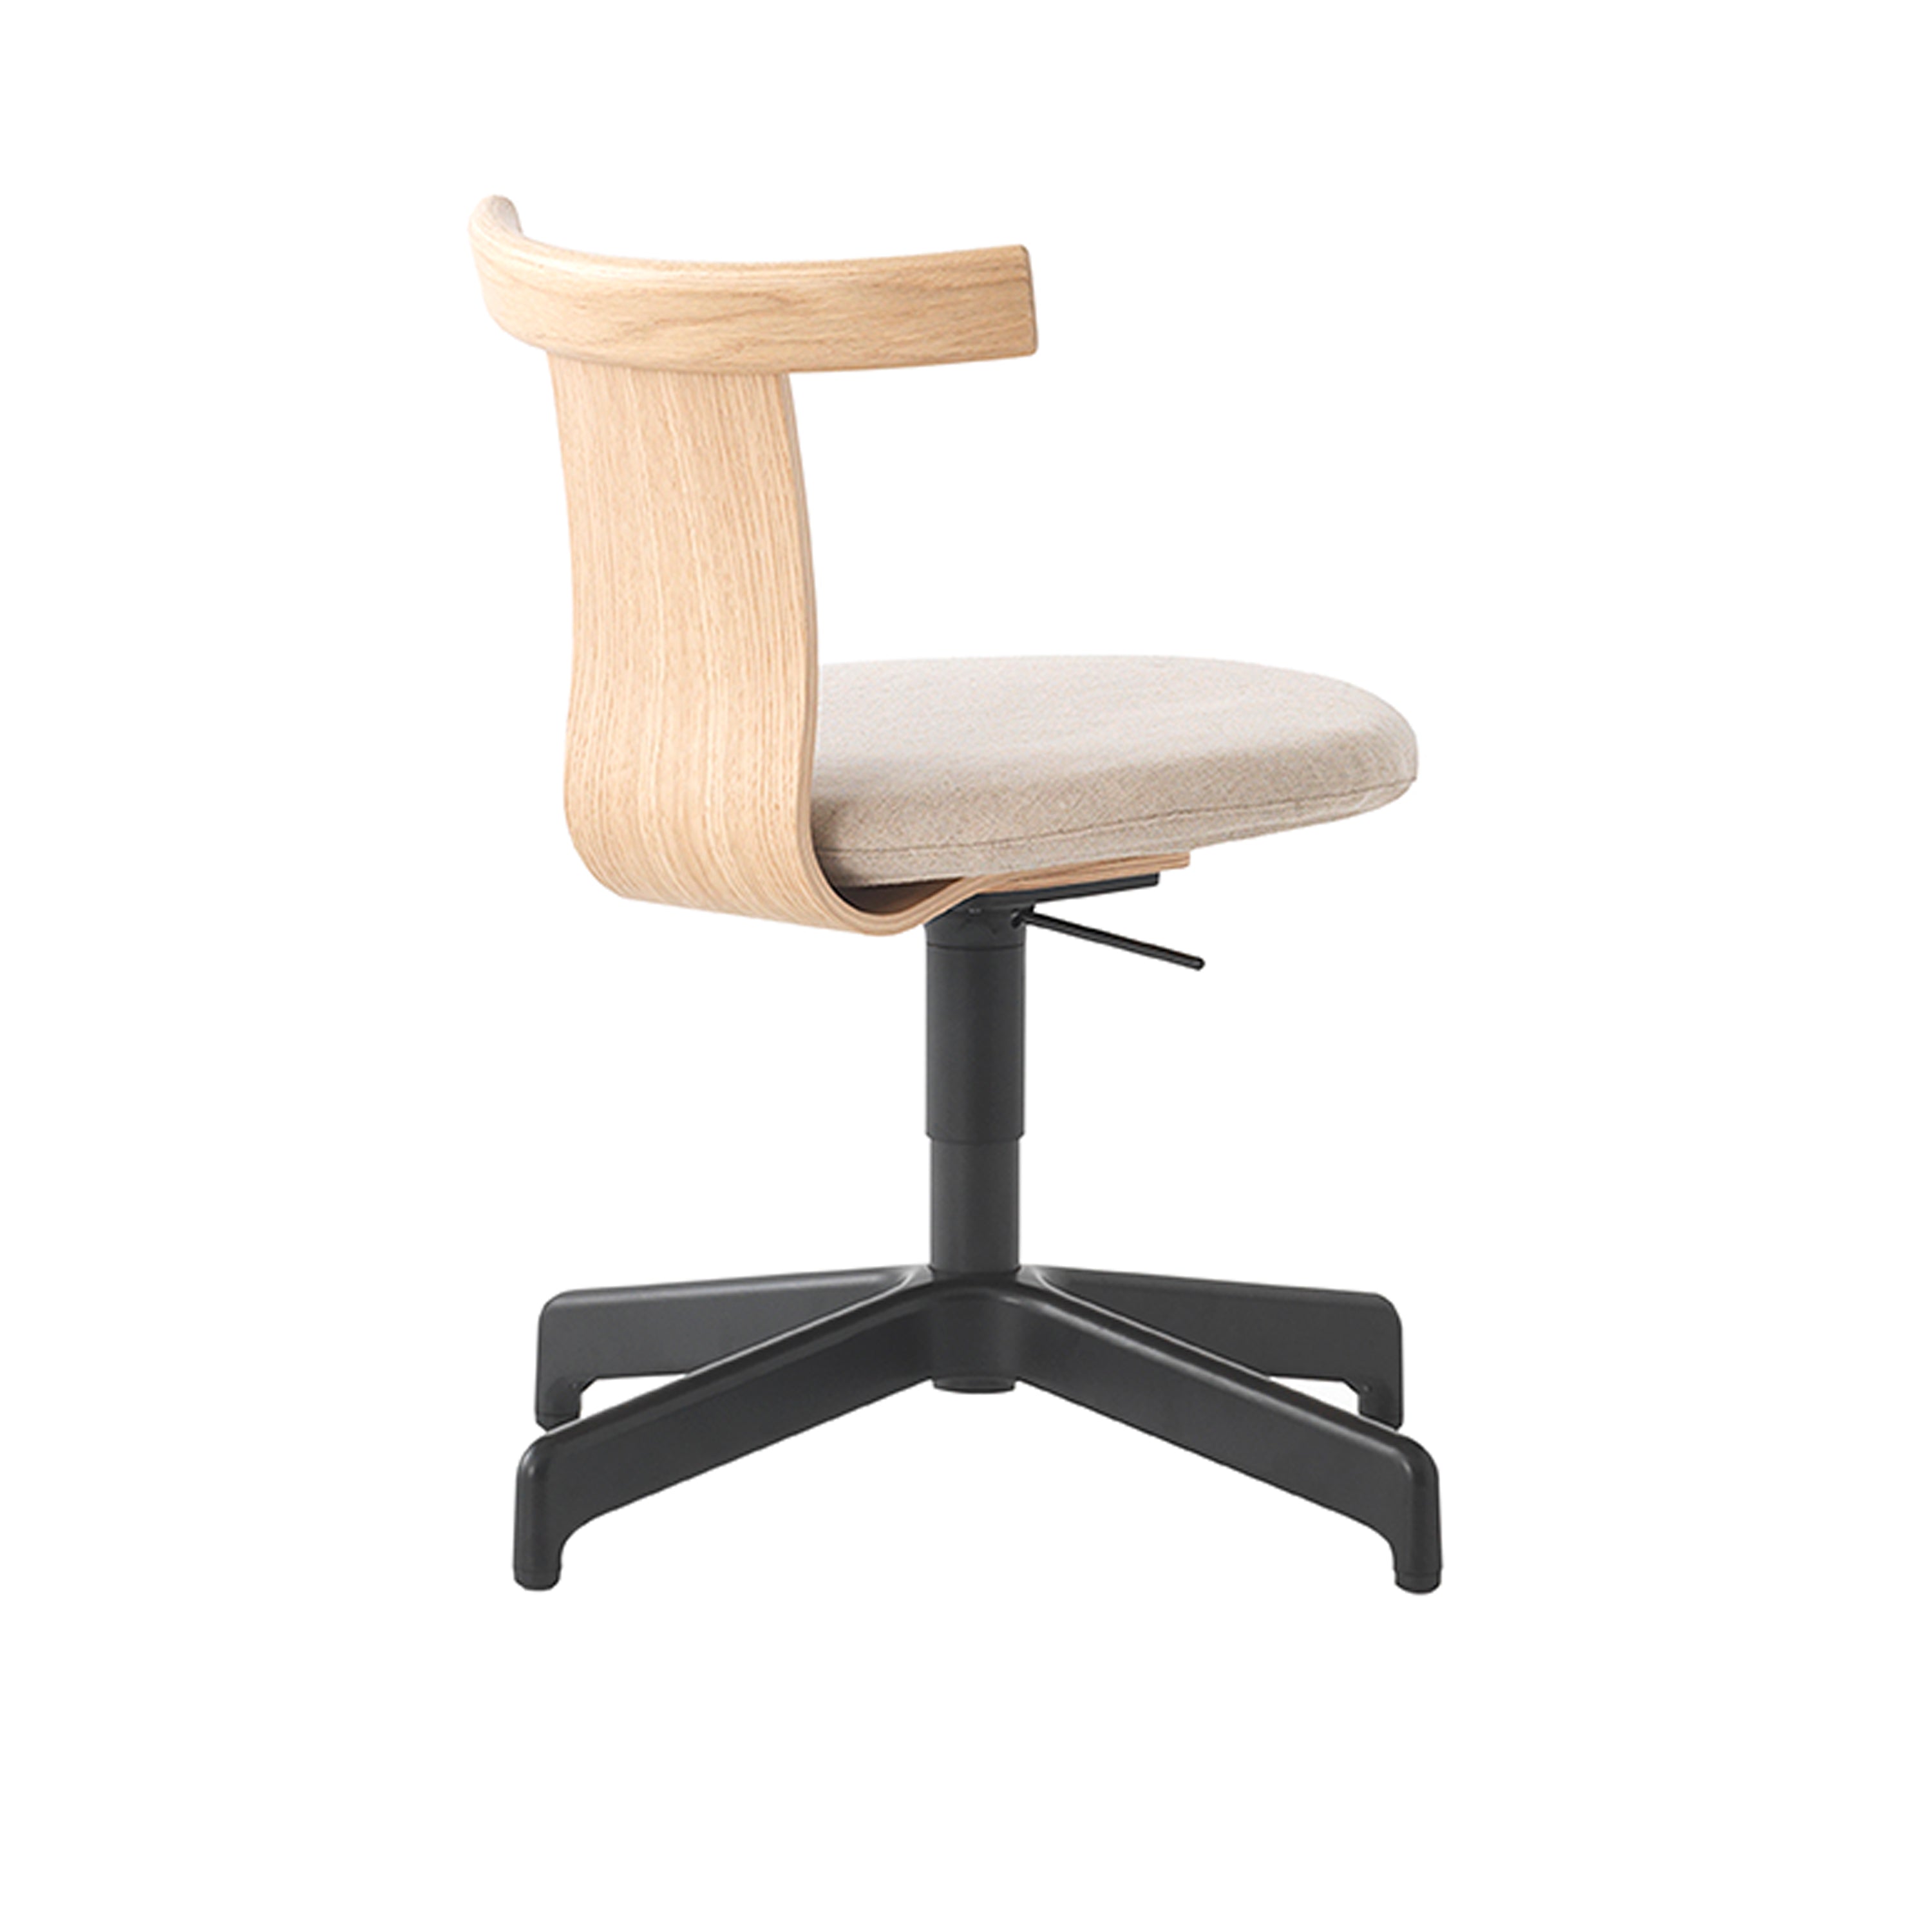 Jiro Swivel Chair: Upholstered + Natural Oak + Black + Without Castors